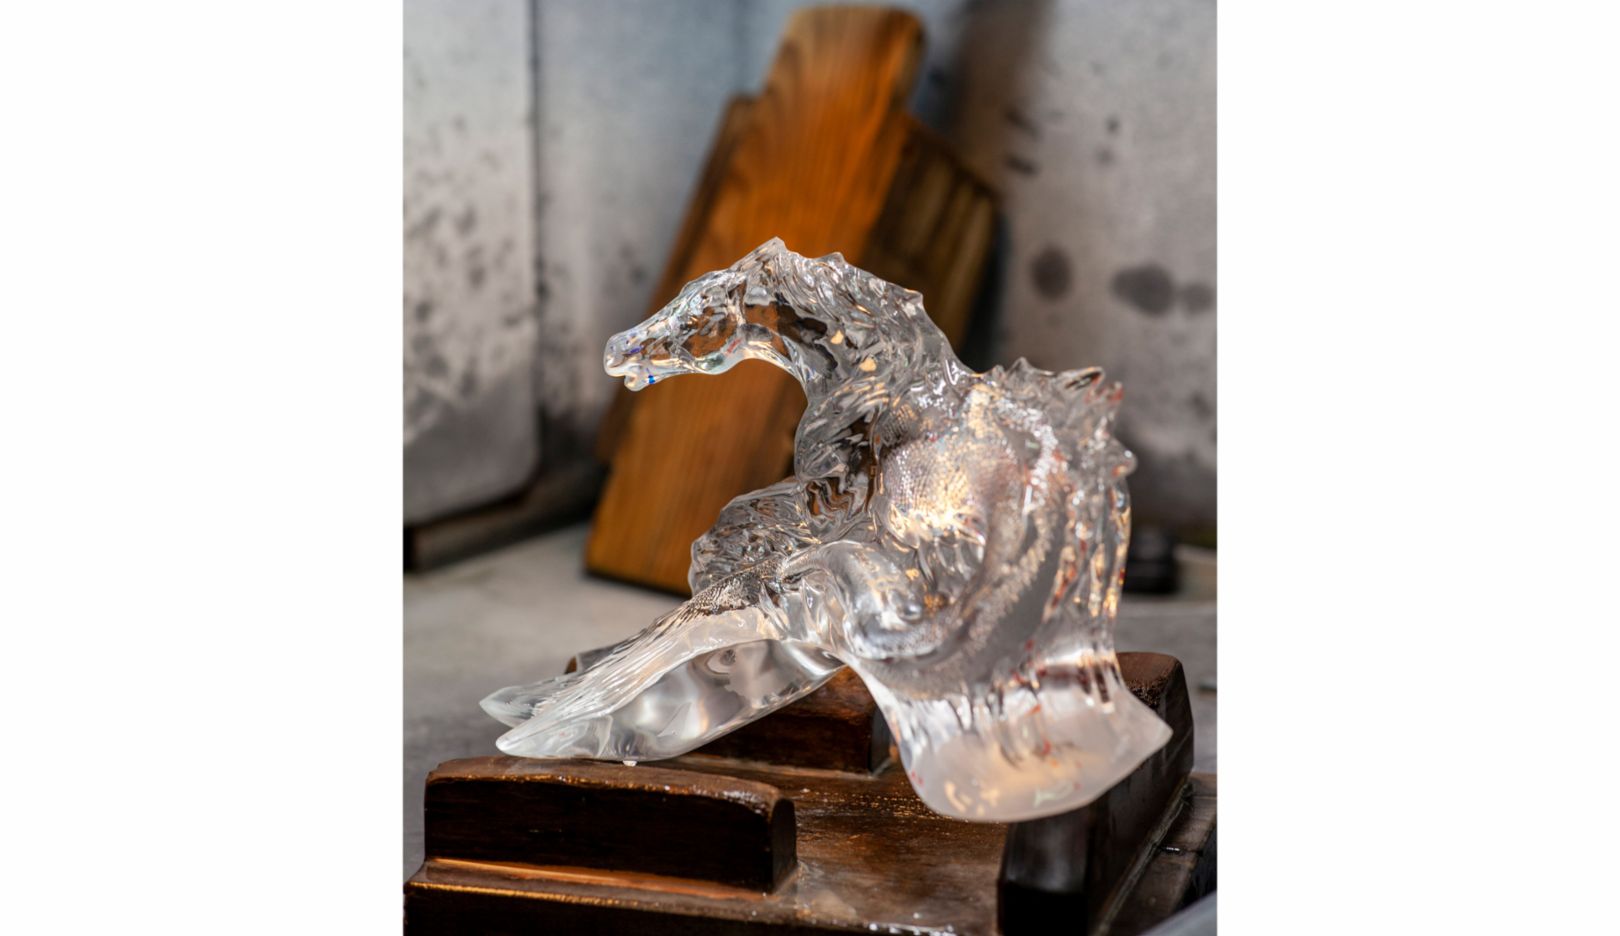 The twenty-five-kilogram sculpture Cheval de Poséidon (Horses of Poseidon) was created in 2019 in a limited edition of 188 pieces. The motif follows ancient depictions. The photo shows the sculpture in its raw state. The crystal still needs to be cut and polished, showing the interplay of clear and satin surfaces.